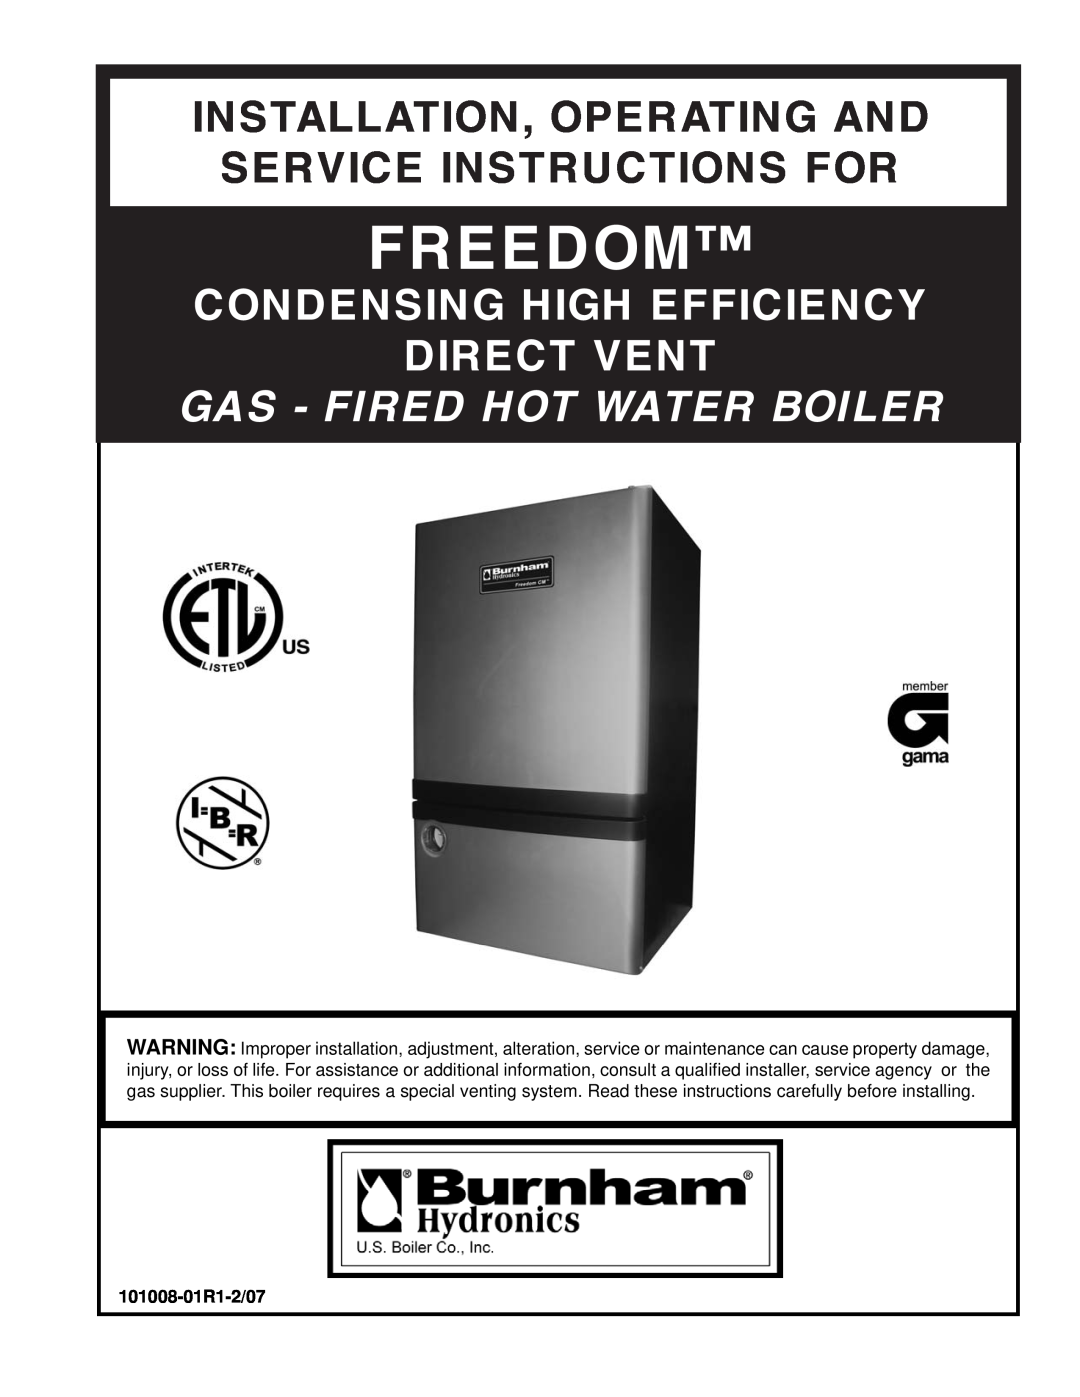 Burnham 101008-01R1-2/07 manual Freedom, Condensing High Efficiency Direct Vent, Gas - Fired Hot Water Boiler 